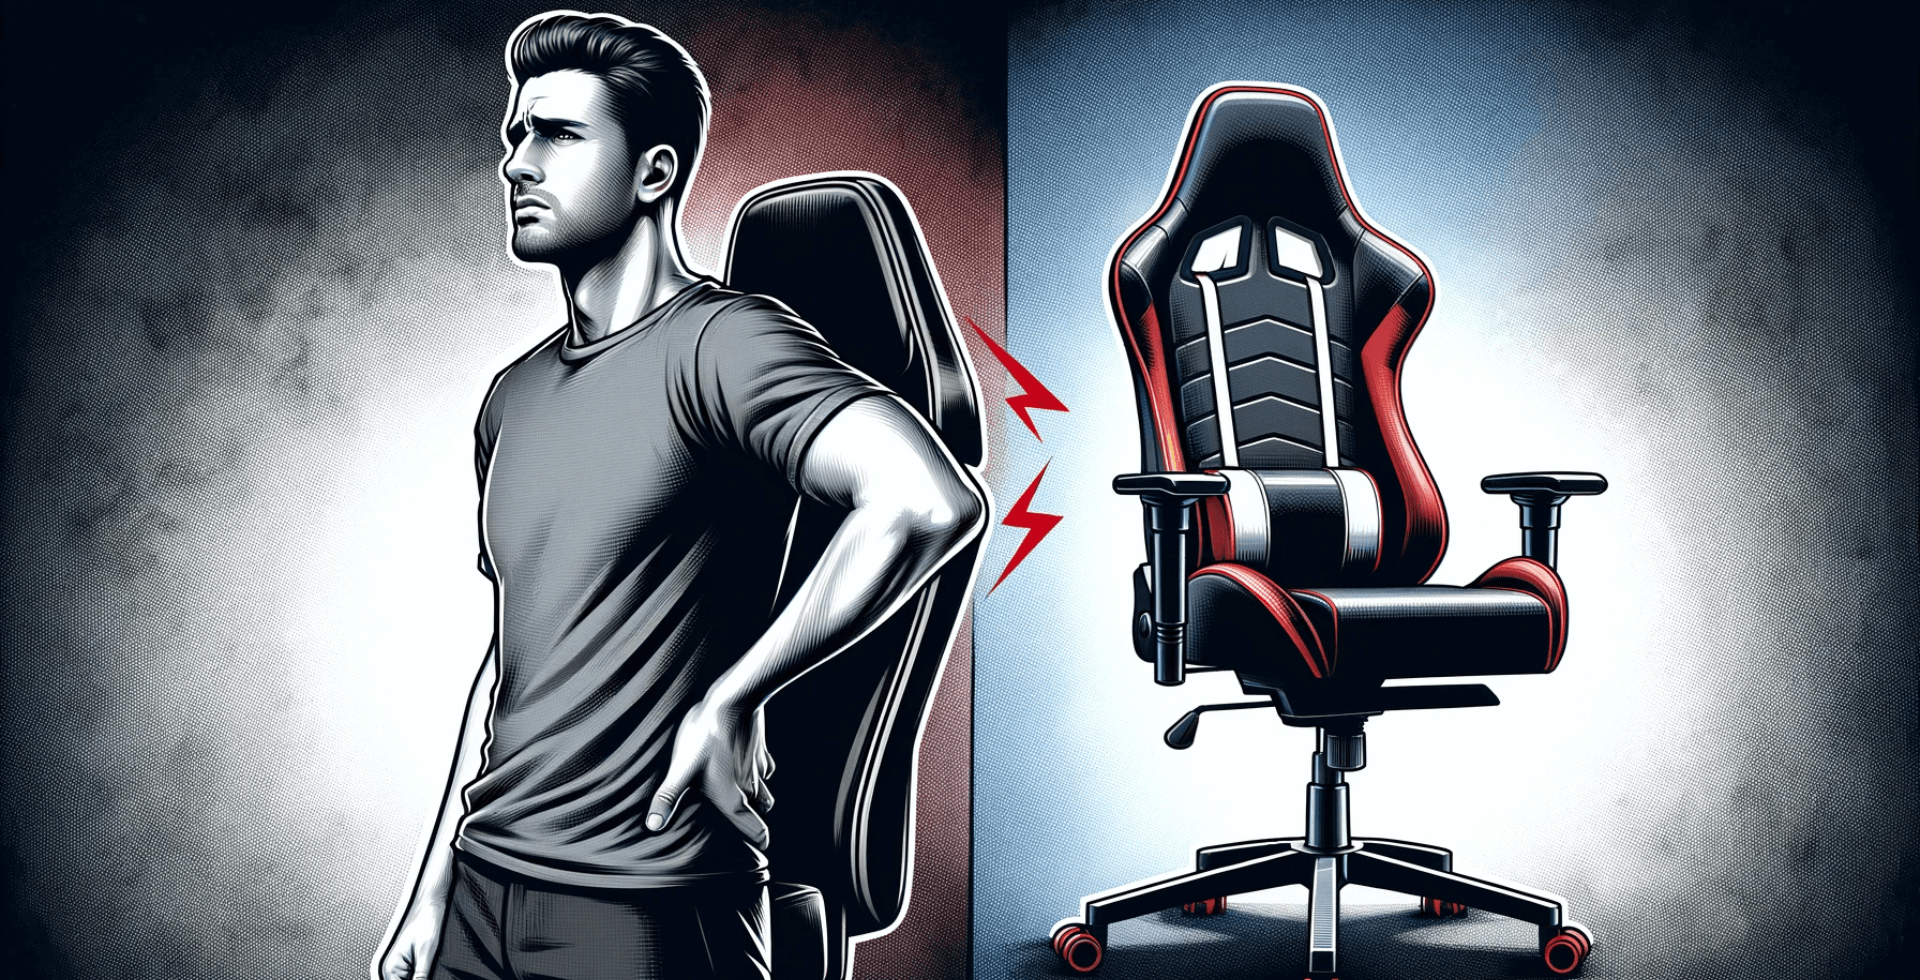 Best Office Chair for Buttock Pain